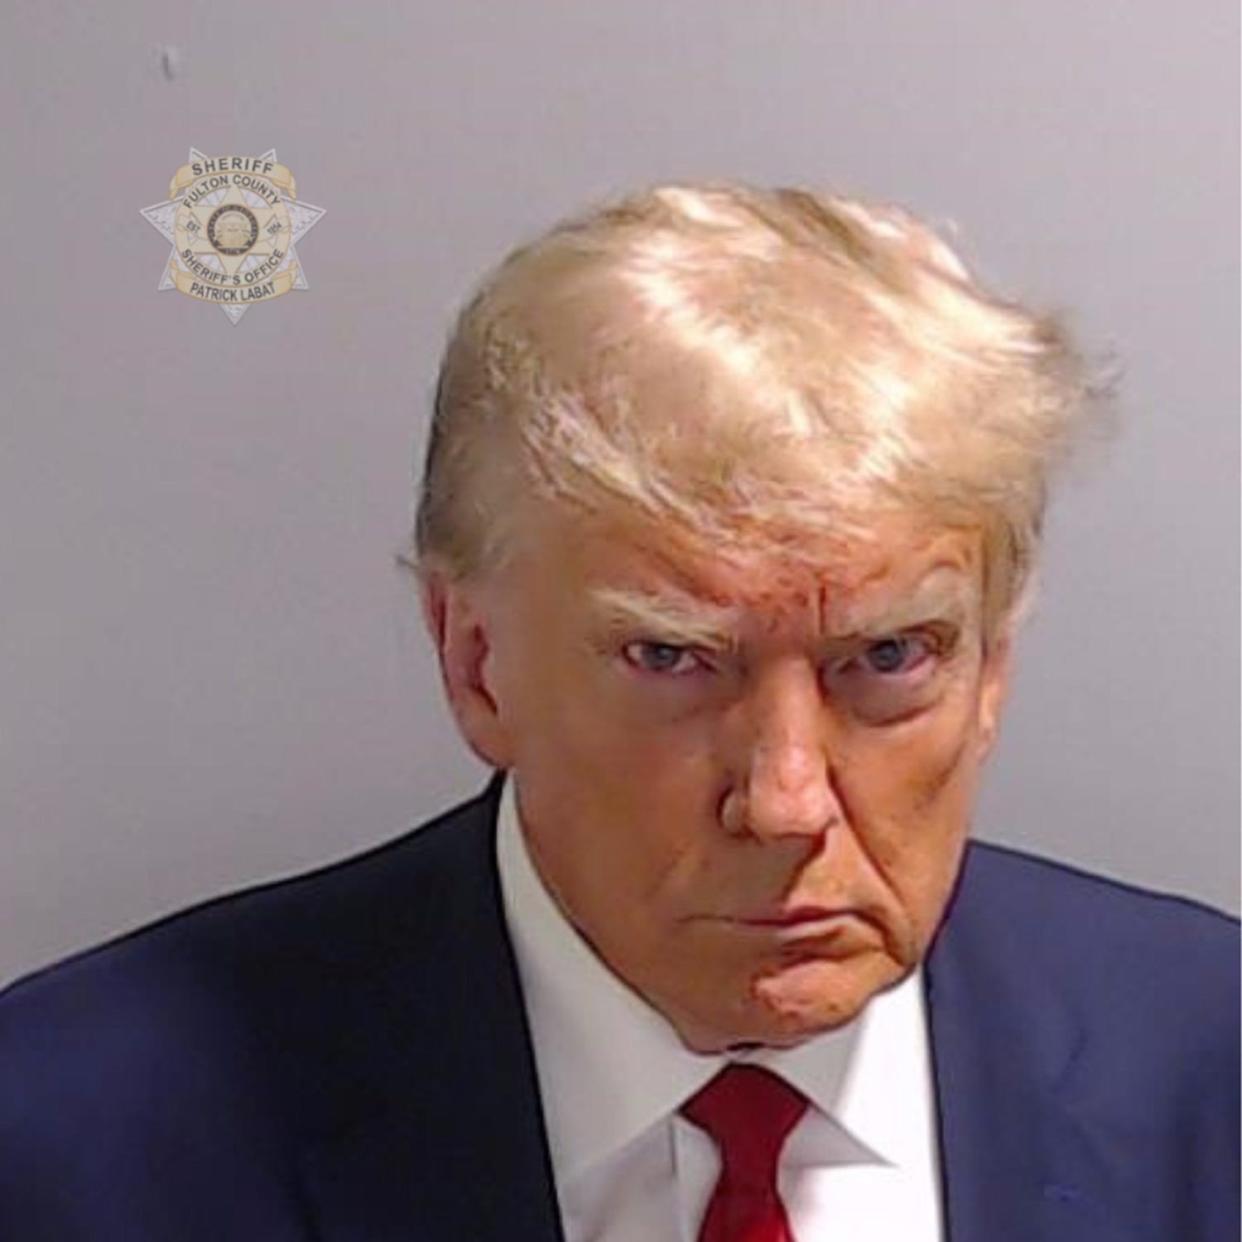 In this handout provided by the Fulton County Sheriff's Office, former U.S. President Donald Trump poses for his booking photo at the Fulton County Jail on August 24, 2023 in Atlanta, Georgia. Trump’s tough-on-crime rhetoric has been ramping up as he faces his own criminal jeopardy, with the former president arguing that prosecutors are ignoring the real crime problem in America to pursue a political “witch hunt” against him.